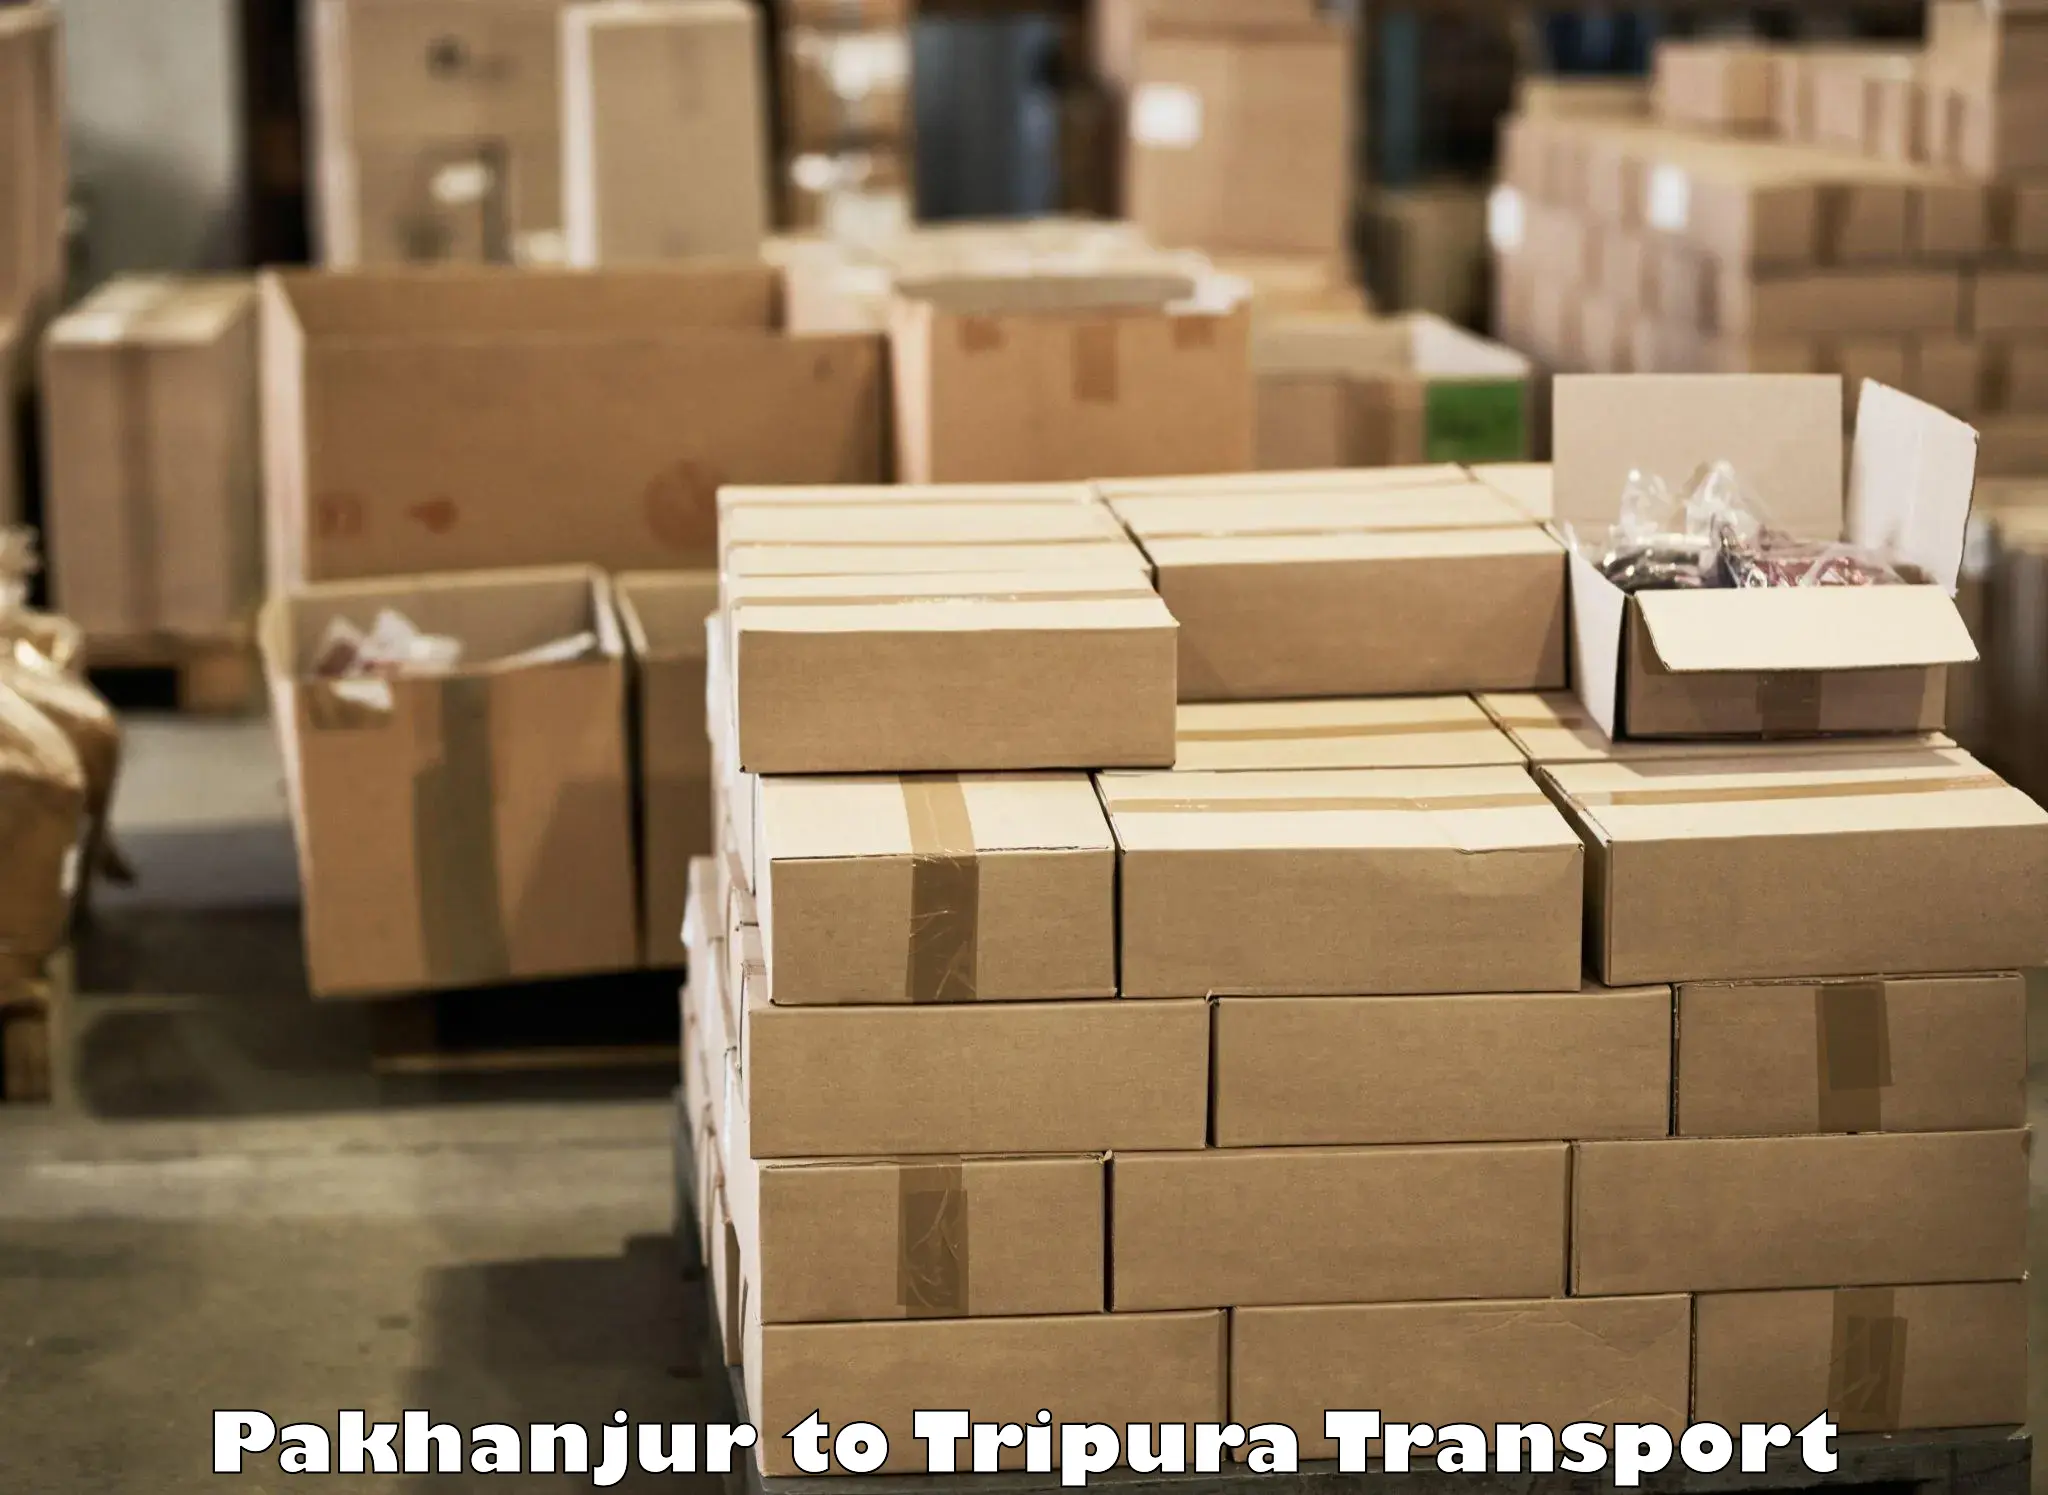 Air freight transport services in Pakhanjur to Udaipur Tripura